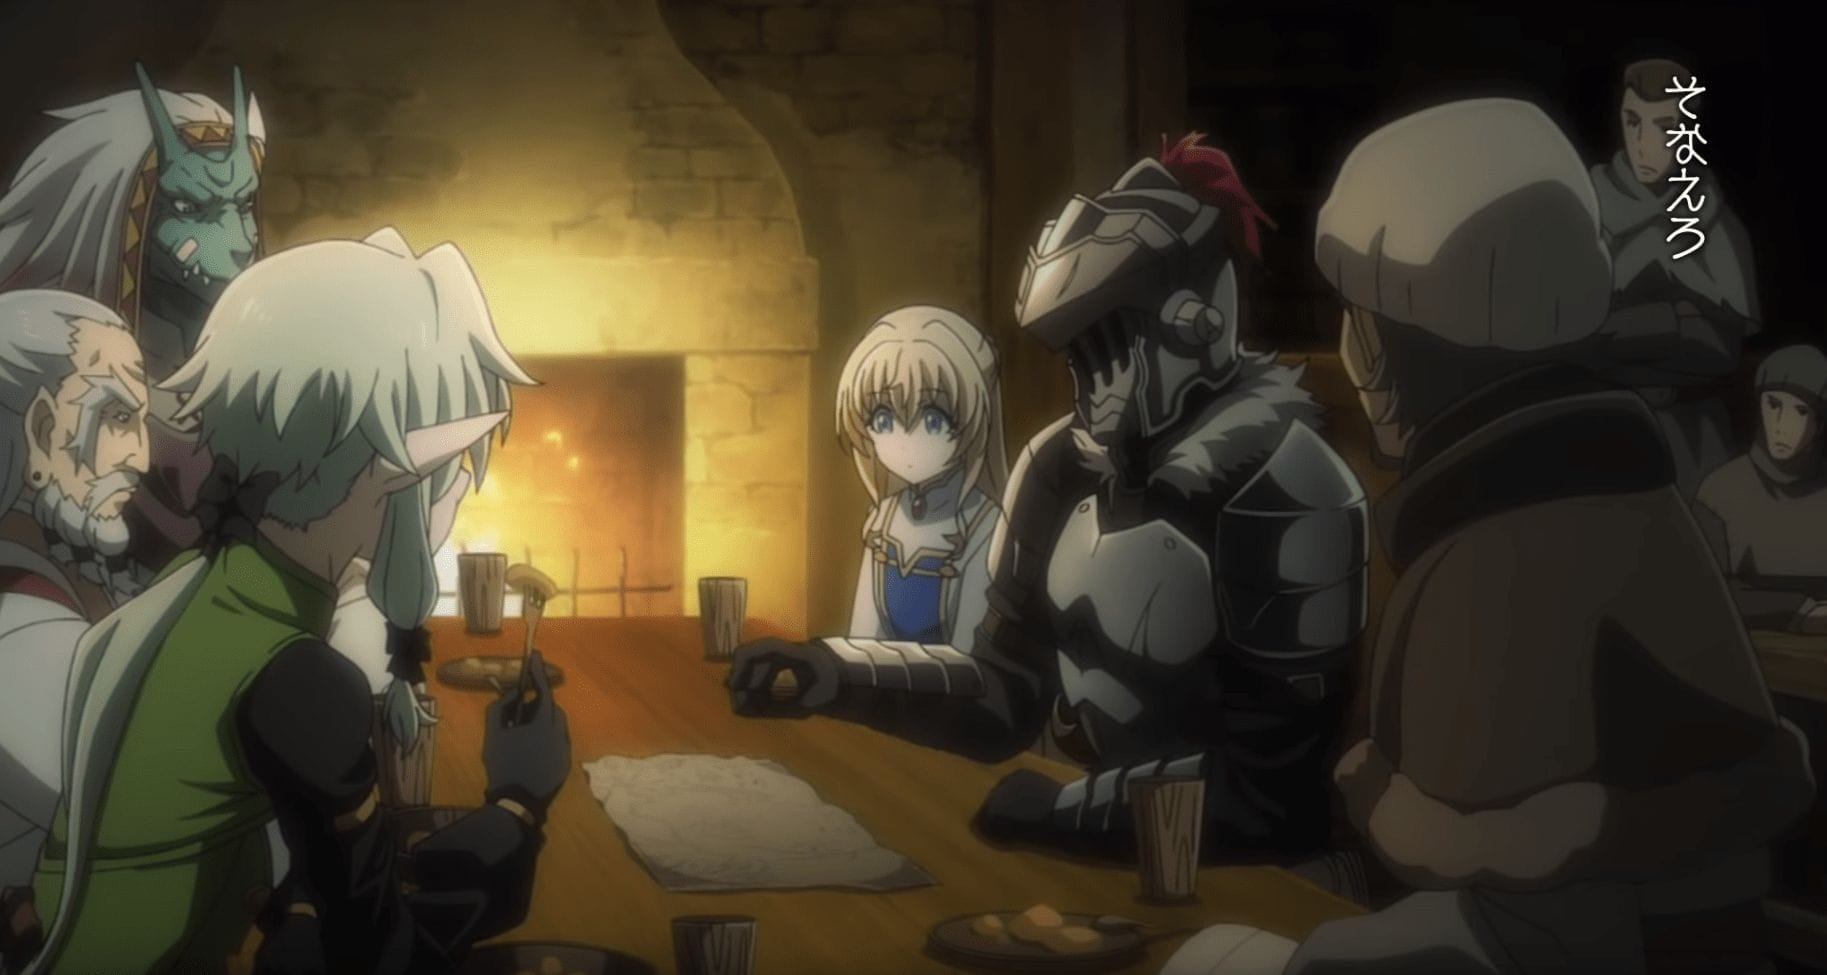 Goblin Slayer Season 2 Highlights Returning Characters in New Teasers